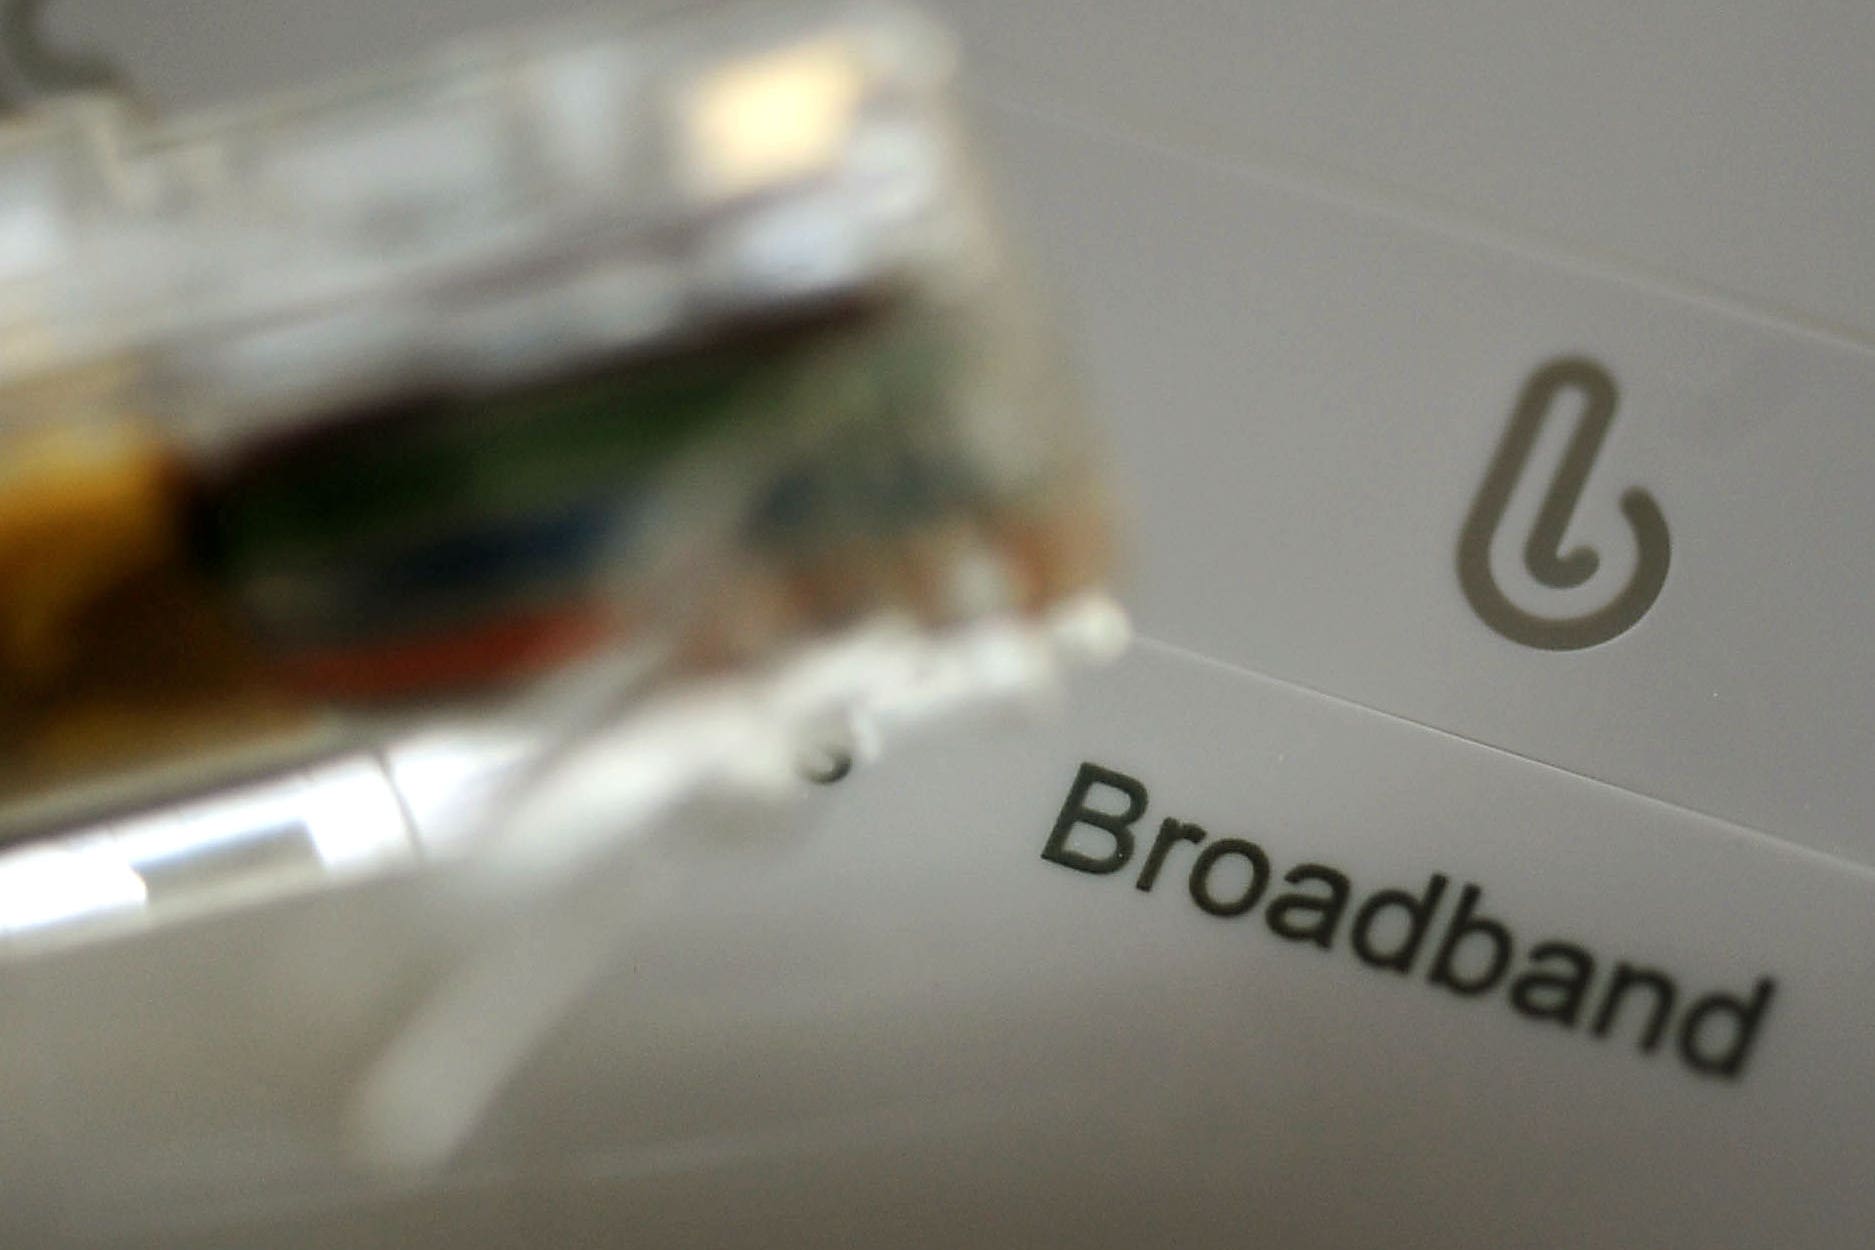 Sky has retaliated by playing BT at its own game, offering free broadband